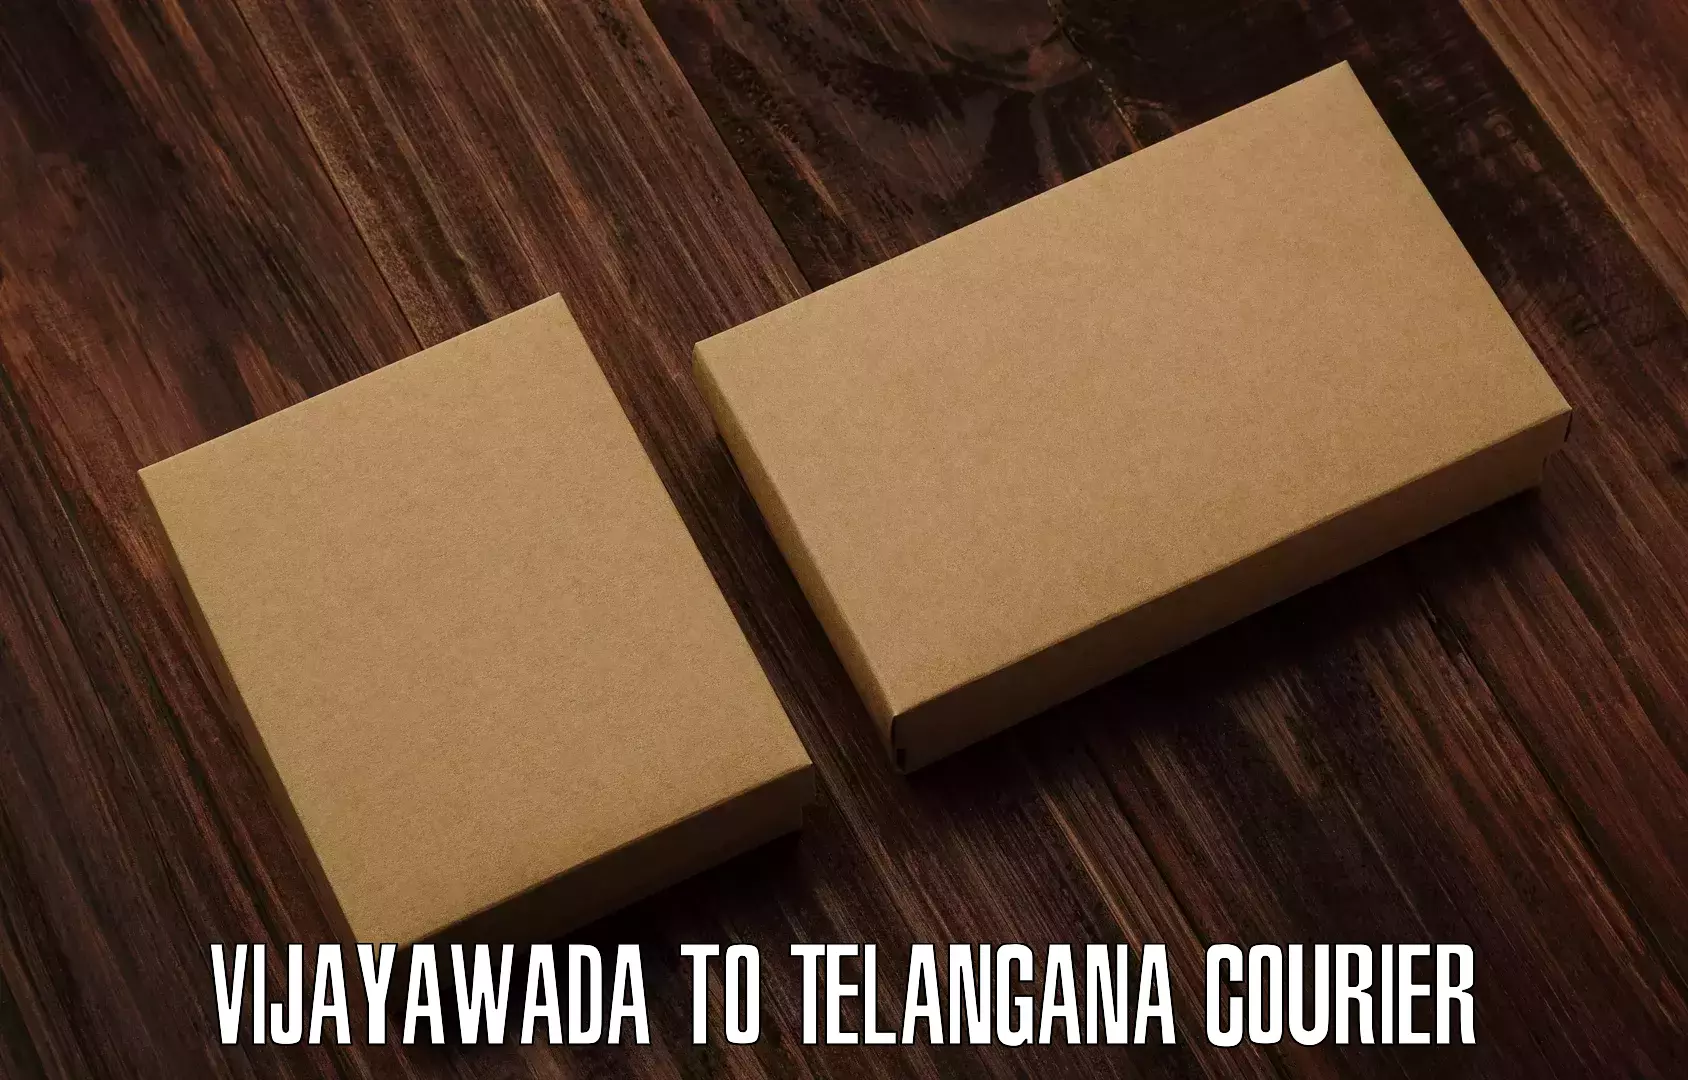 User-friendly delivery service Vijayawada to Asifabad